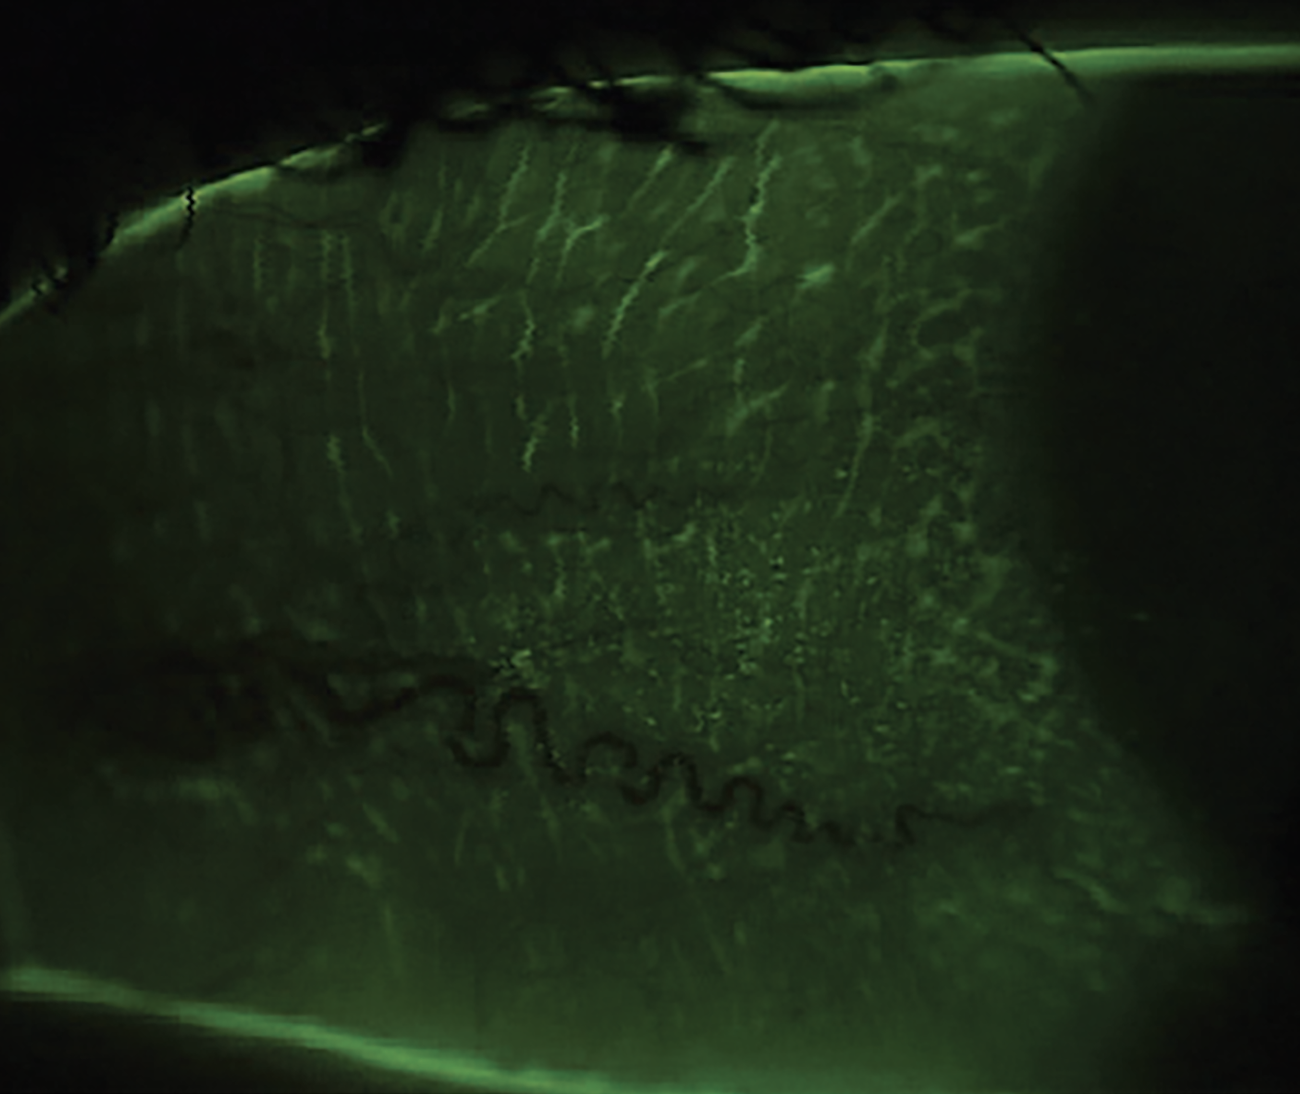 Fig. 1b. Trace conjunctival staining with NaFl and a Wratten filter, the latter of which helps to detect subtle conjunctival staining without using other irritating dyes. Conjunctival staining indicates damage to the mucin-producing goblet cells. A nighttime ointment with vitamin A is a useful treatment for this type of staining. 